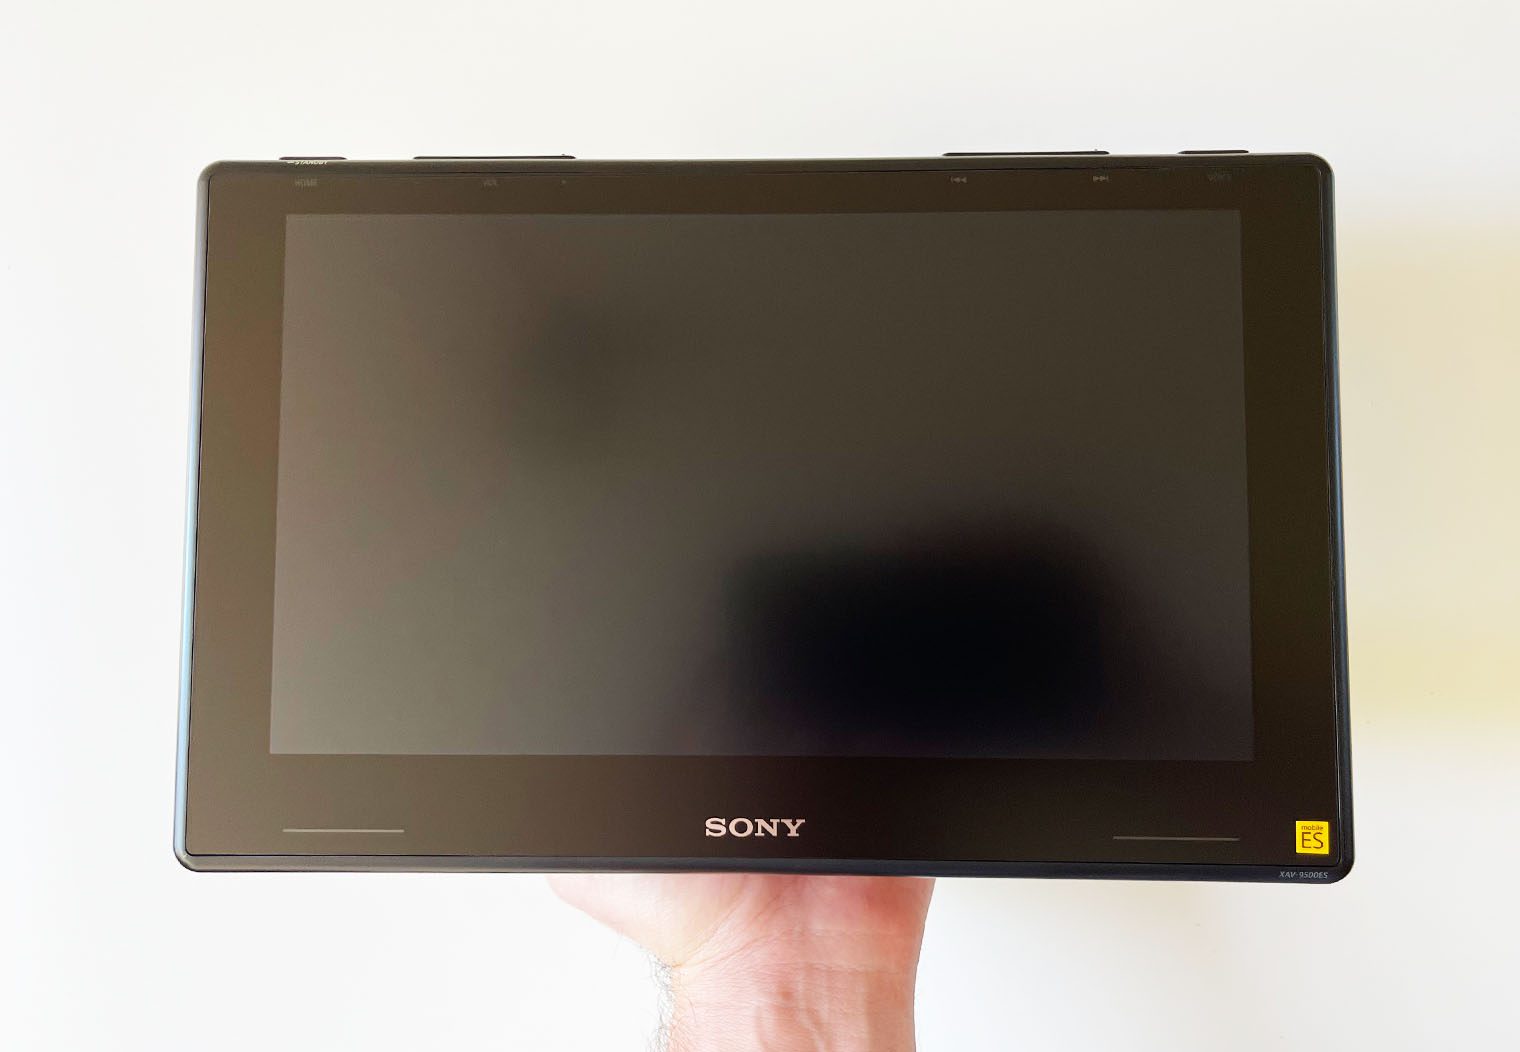 Holding the Sony XAV-9500ES 10inch screen in hand to showcase the size and look